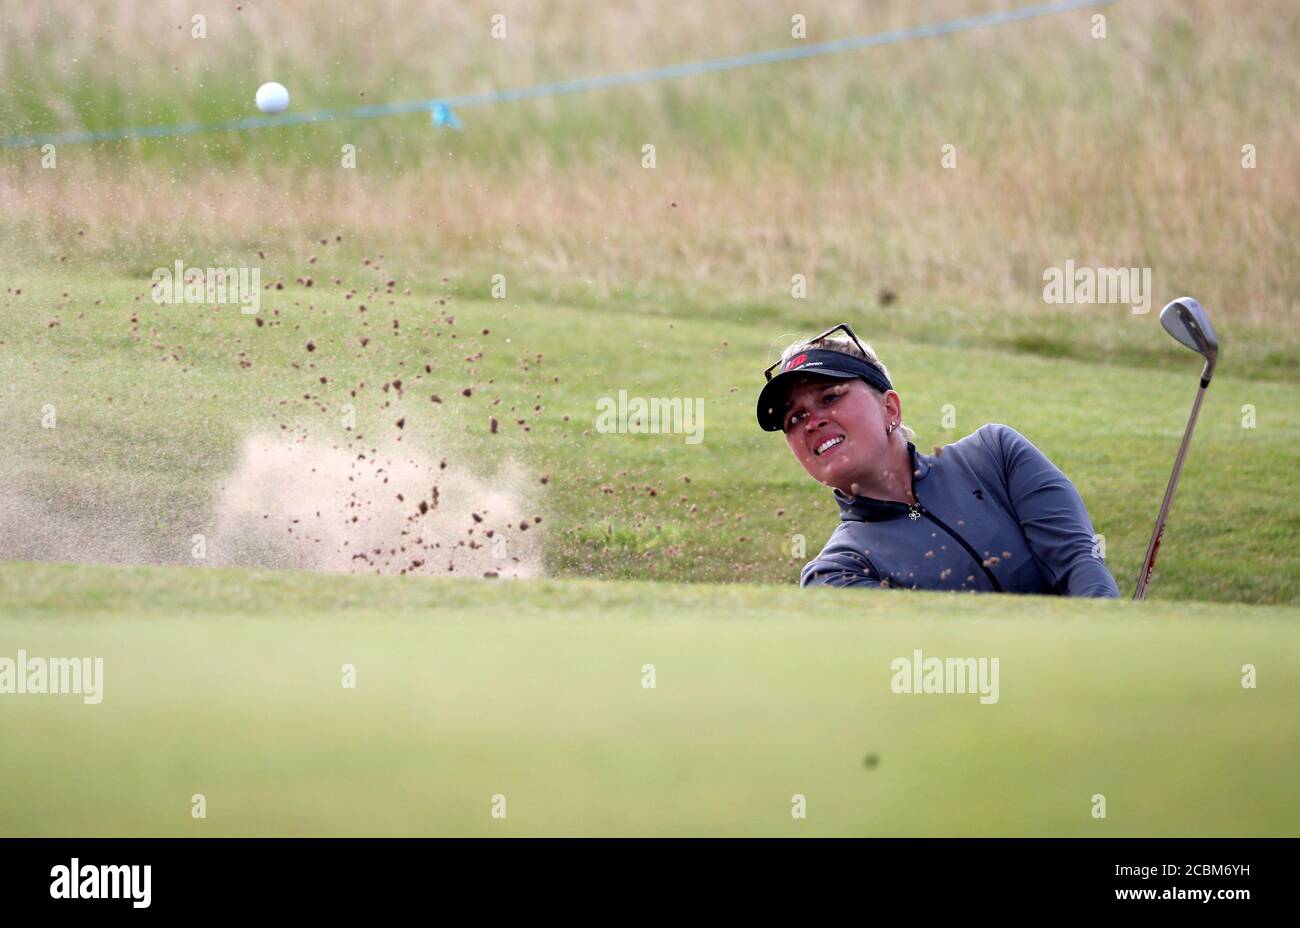 Denmark's Nanna Koerstz Madsen in a bunker on the ninth hole during day two of the Aberdeen Standard Investments Ladies Scottish Open at The Renaissance Club, North Berwick. Stock Photo